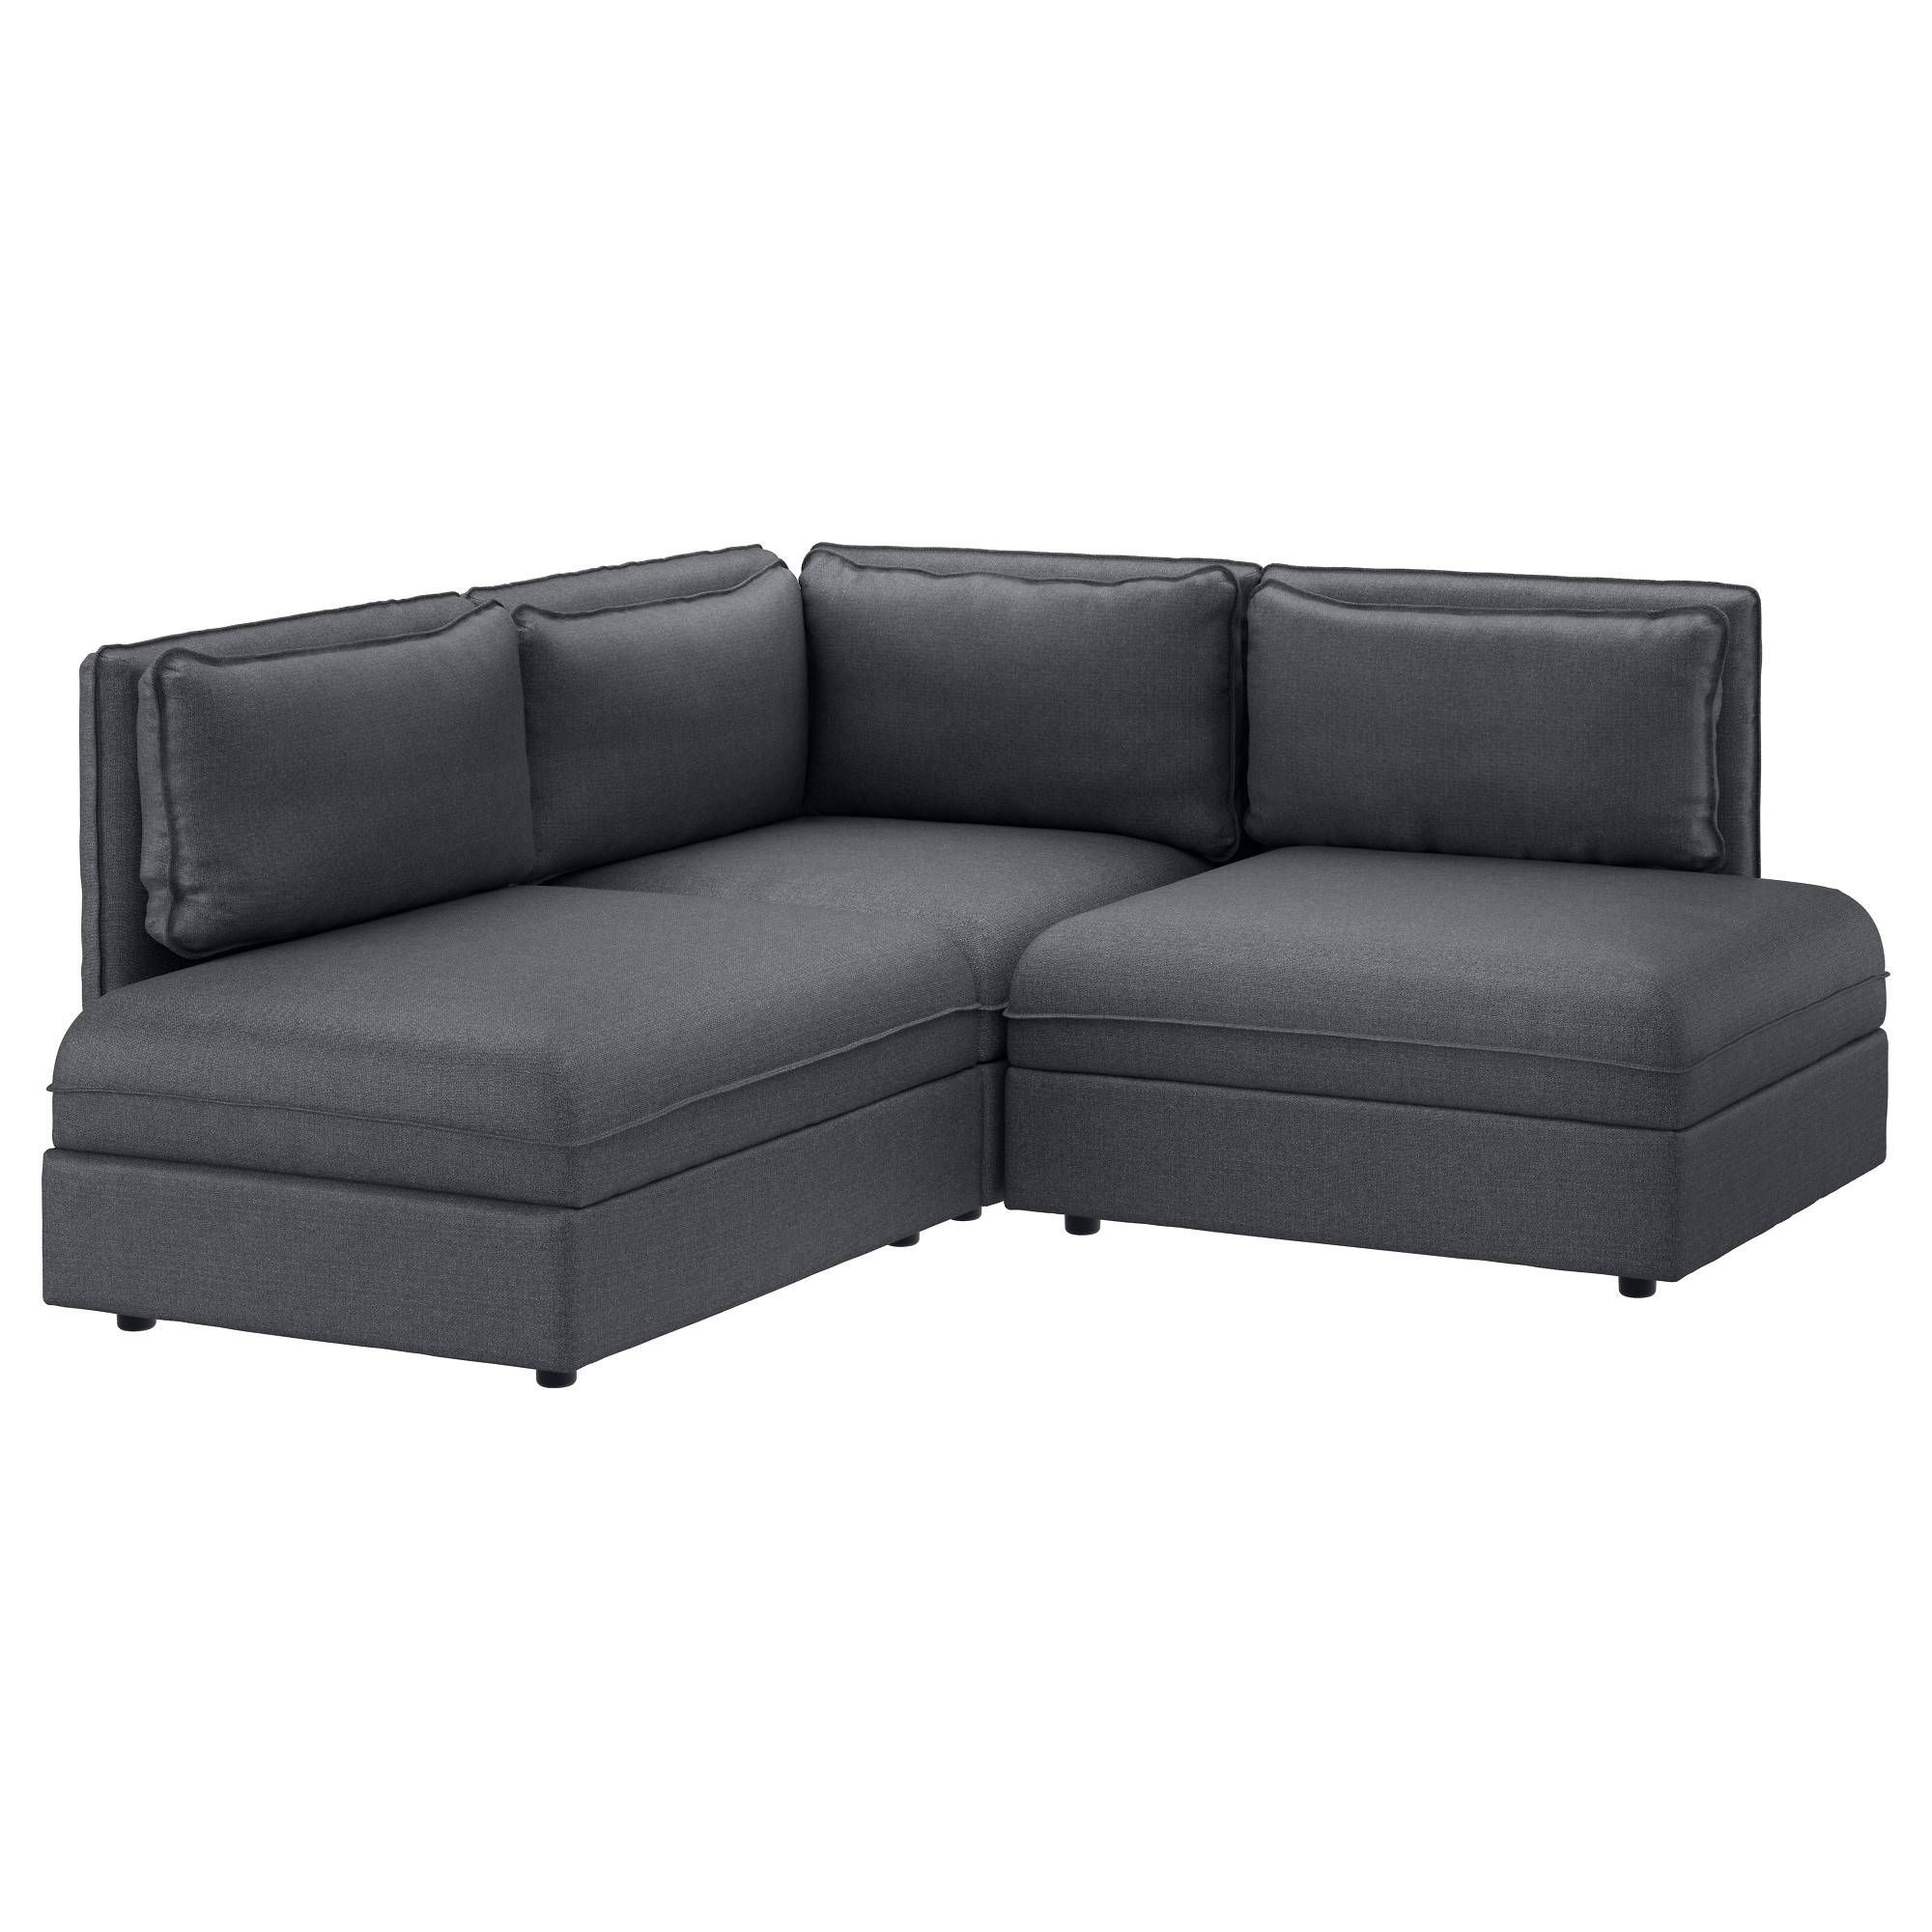 Fabric Sectional Sofas – Ikea Throughout 2 Seat Sectional Sofas (View 4 of 30)